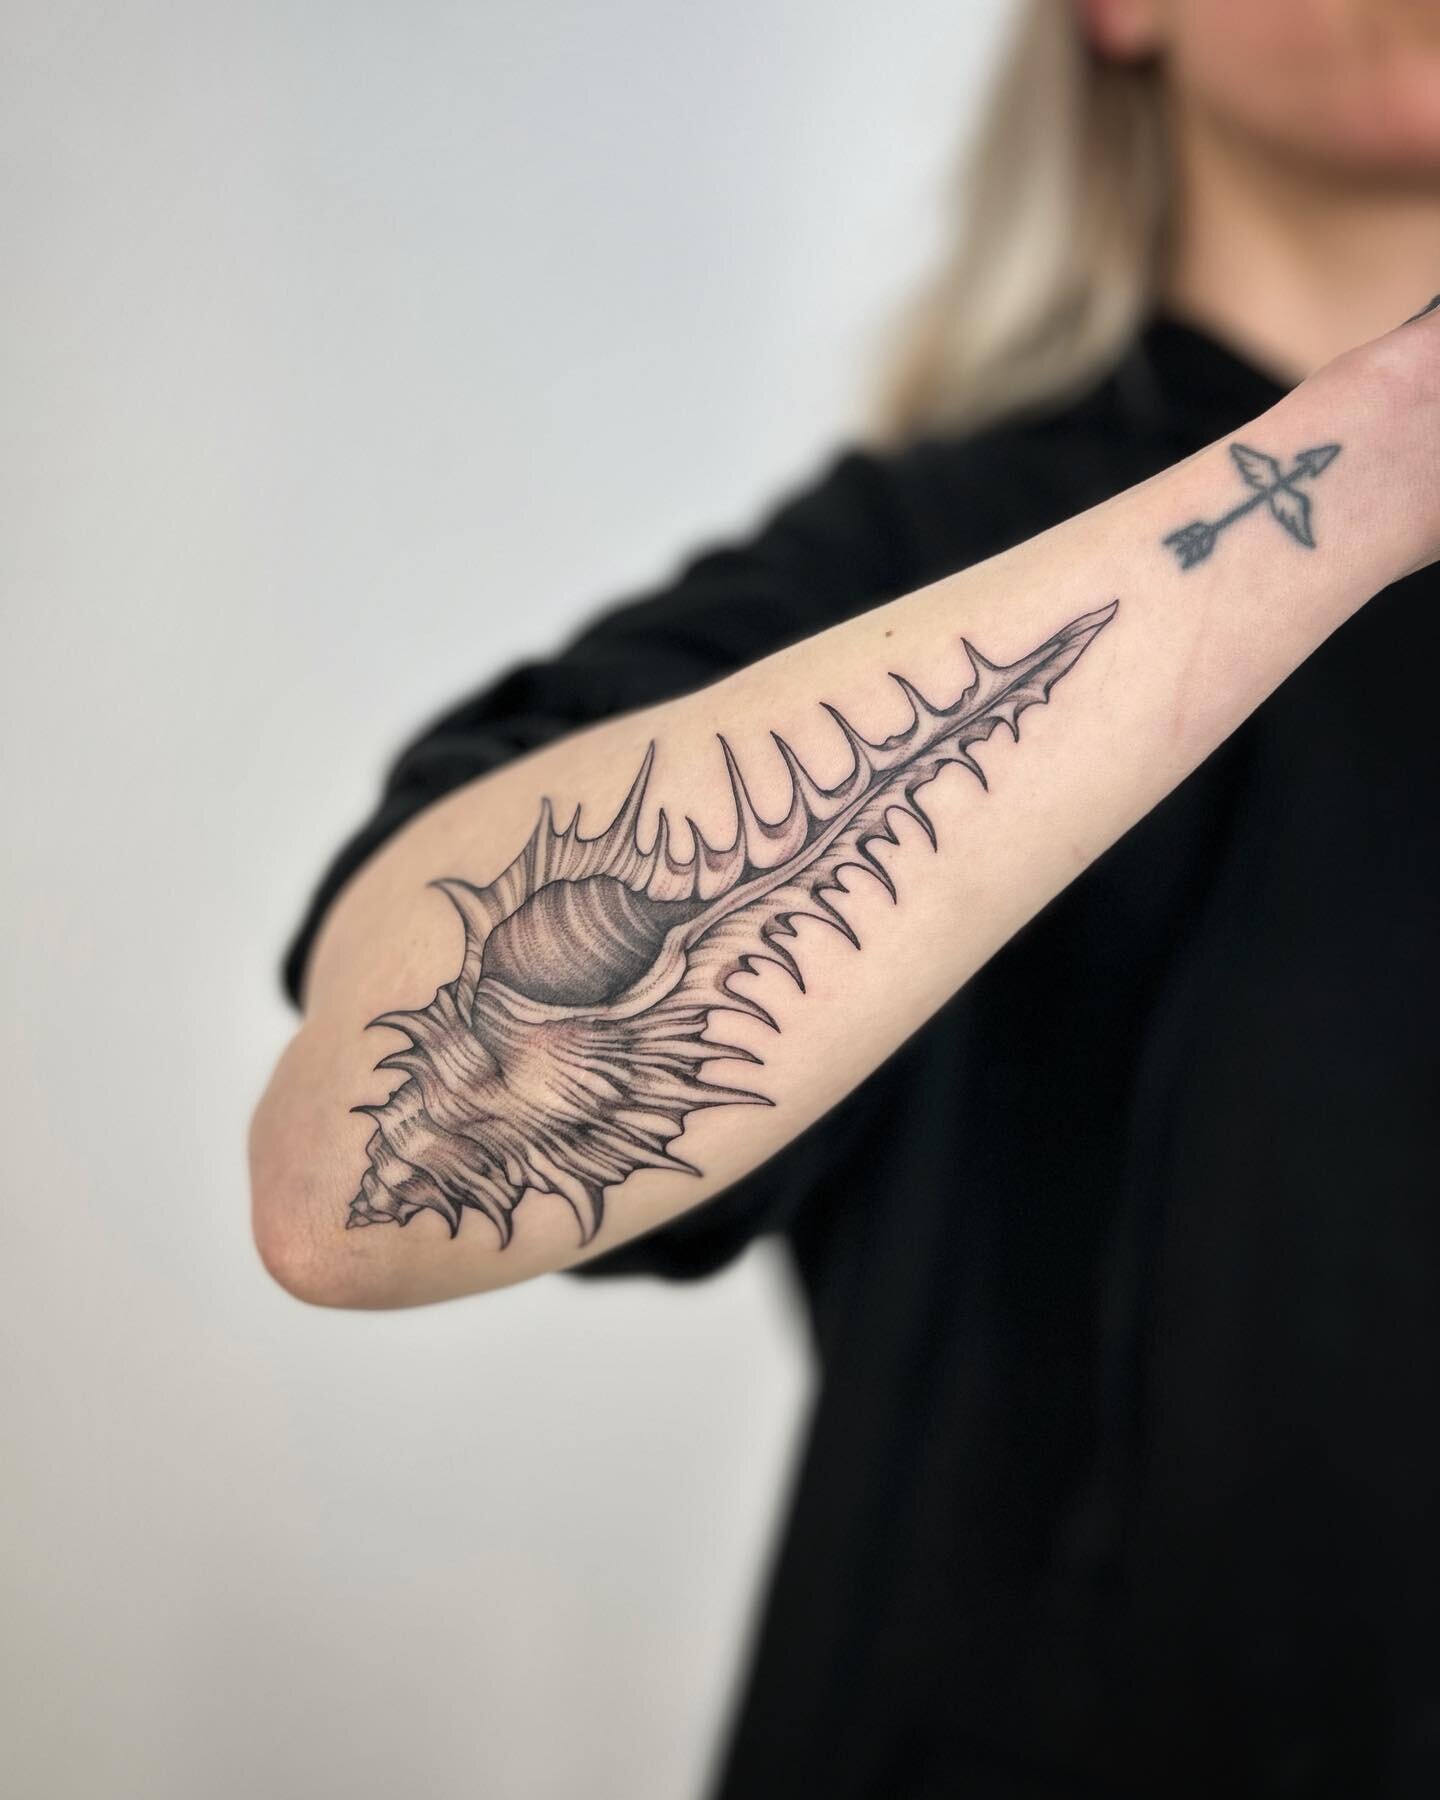 Spiky seashell for Rose, thanks so much! ✨ Email paulajdaveytattoo@gmail.com for bookings.